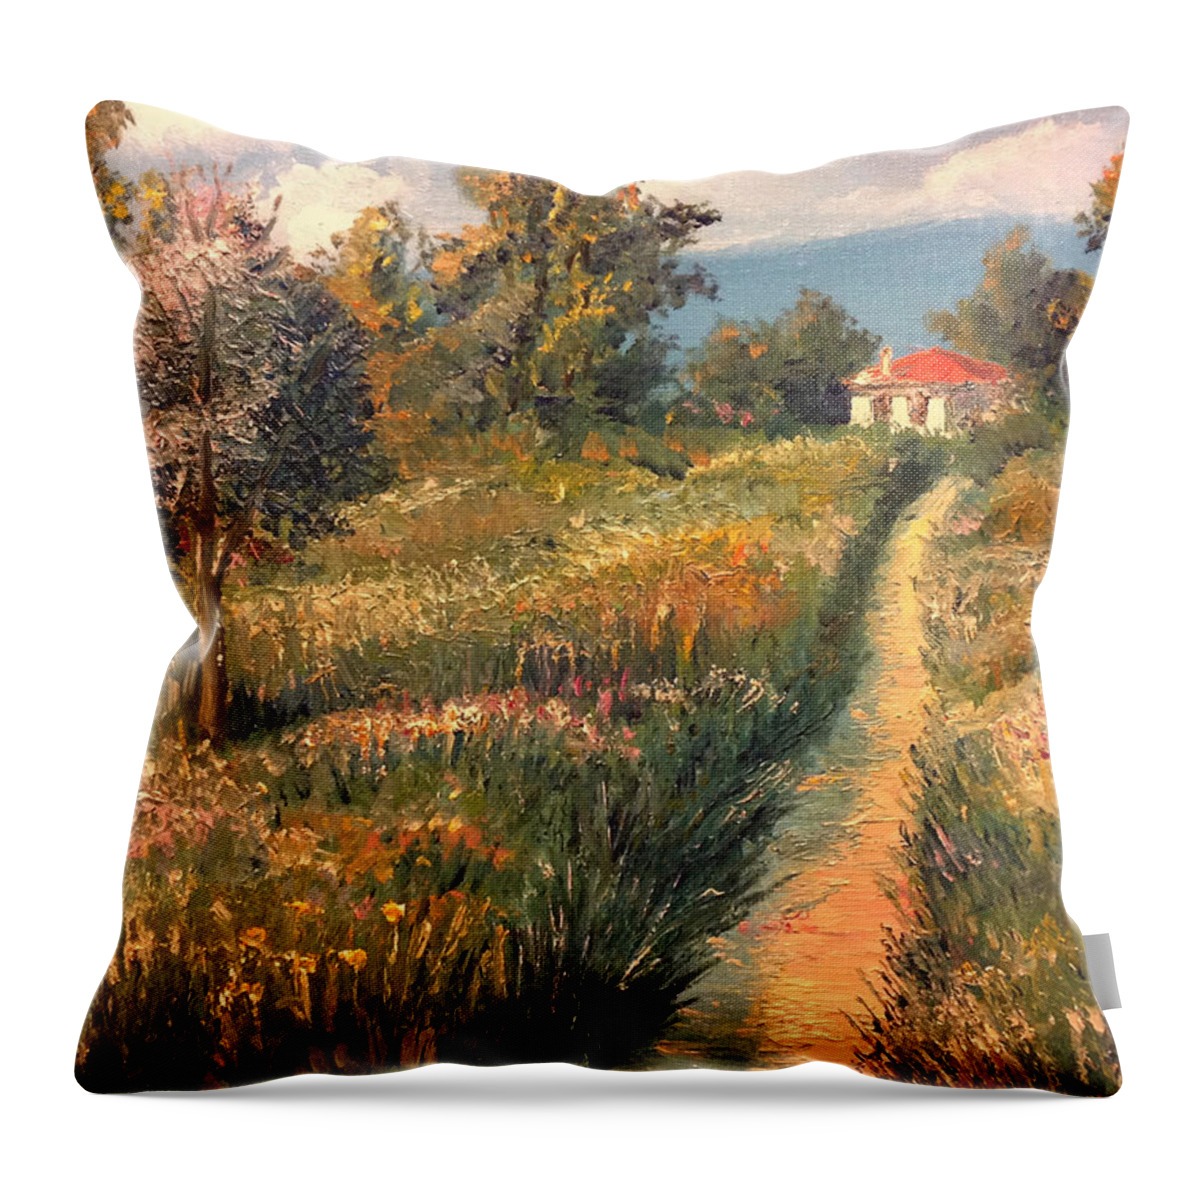 Cottage Throw Pillow featuring the painting Rural Idyll by Vit Nasonov